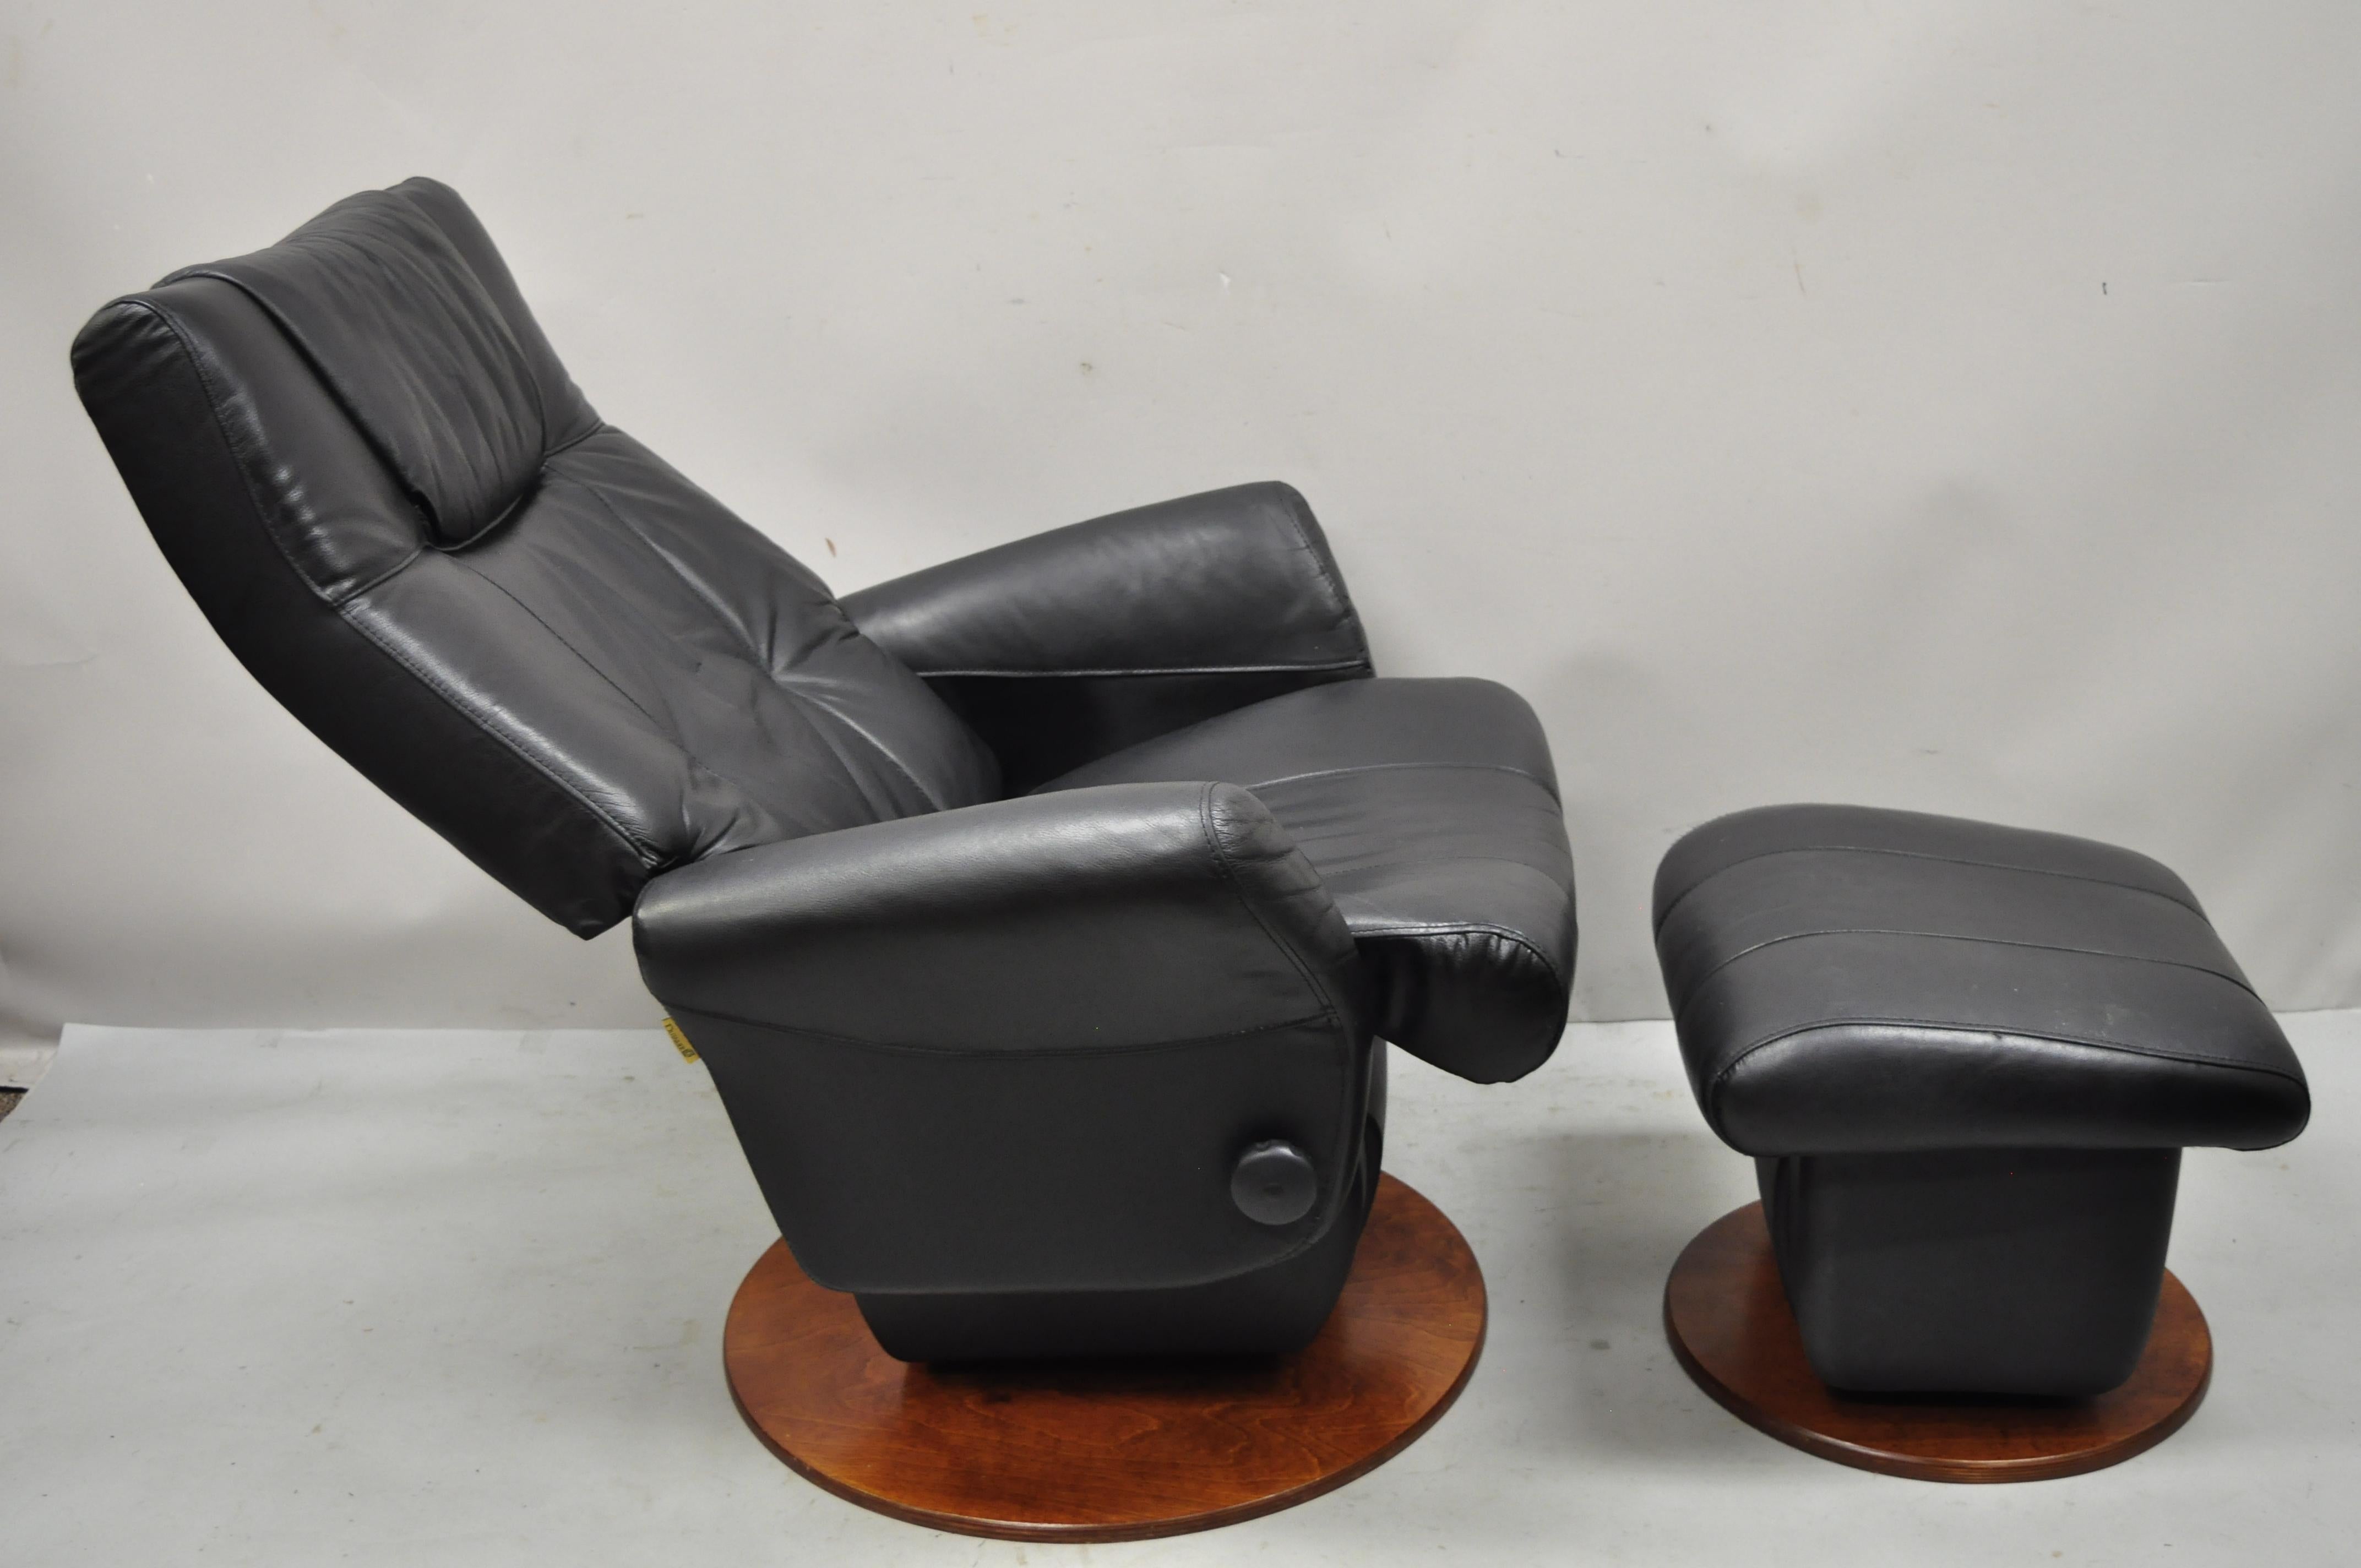 Dutailier black leather avant glide glider swivel recliner chair and ottoman. Item features swivel, tilt, recliner lounge chair, tilting/rocking ottoman, black leather upholstery, original label, quality Canadian craftsmanship, great style and form.